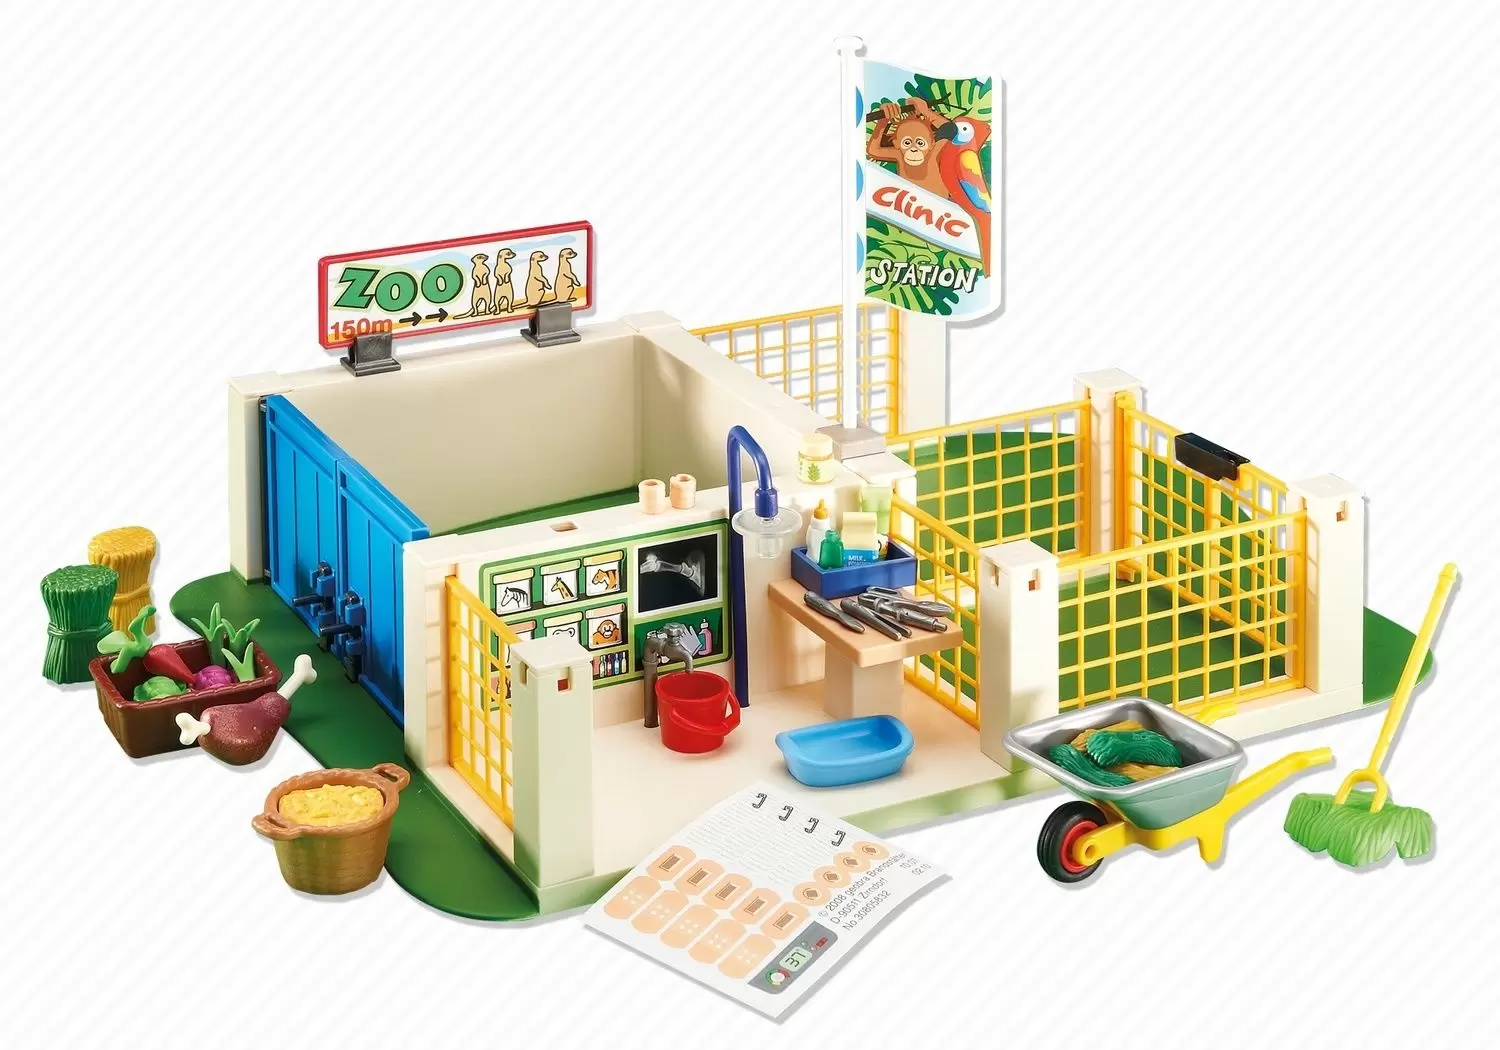 Zoo Care Station - Playmobil in City 6425